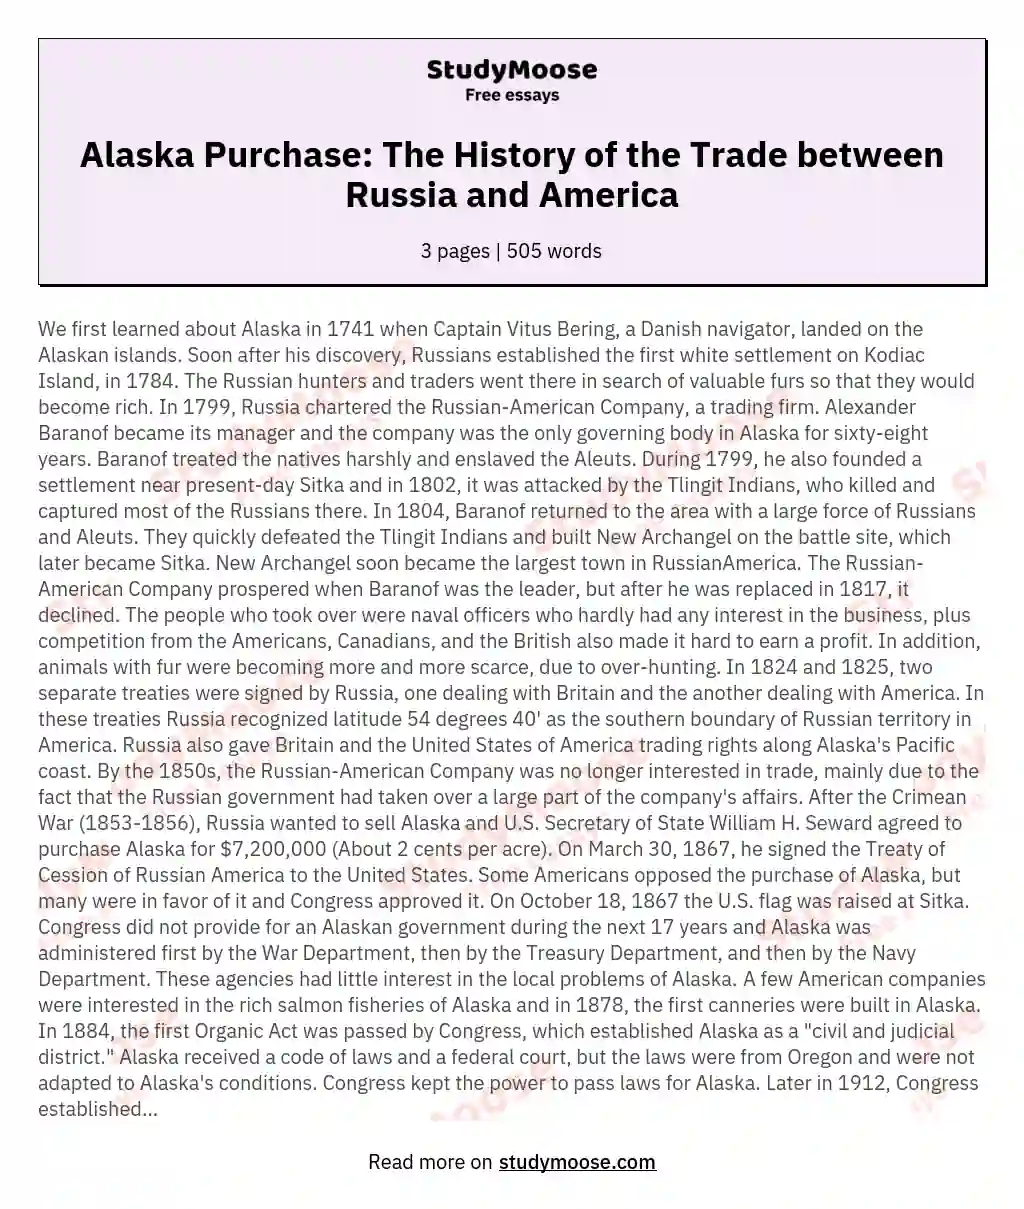 Alaska Purchase: The History of the Trade between Russia and America